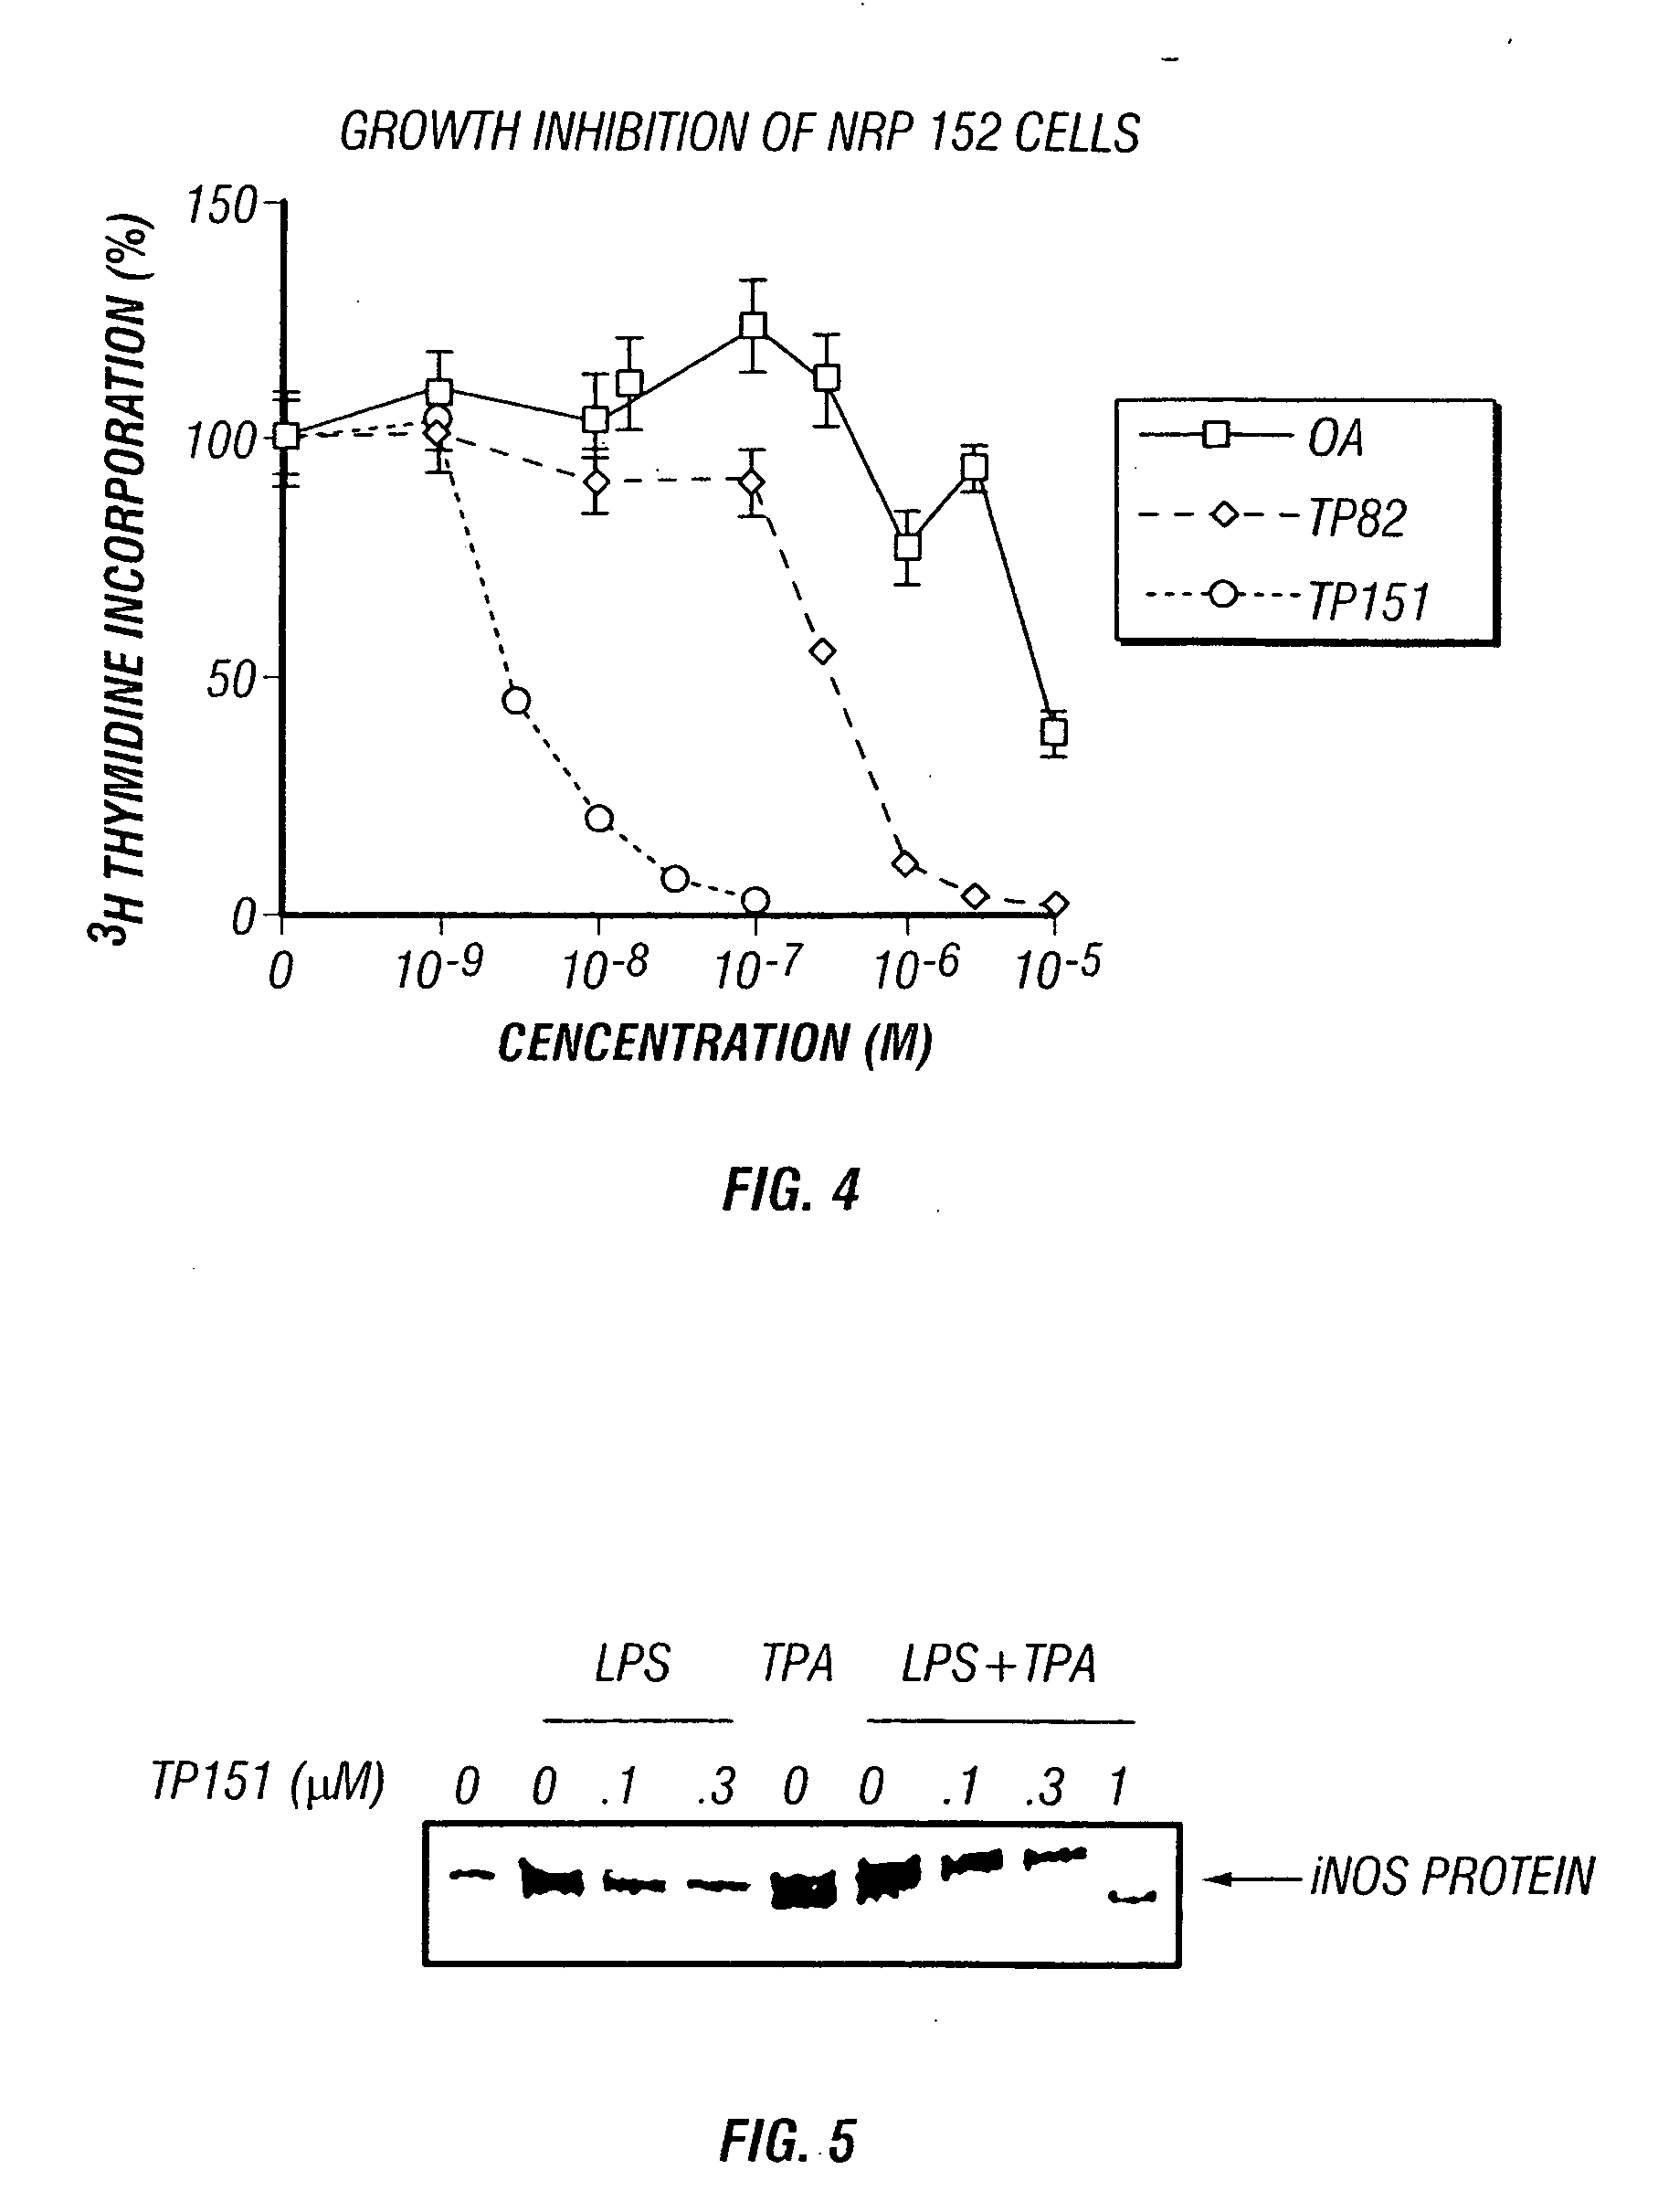 Therapeutic compositions and methods of use